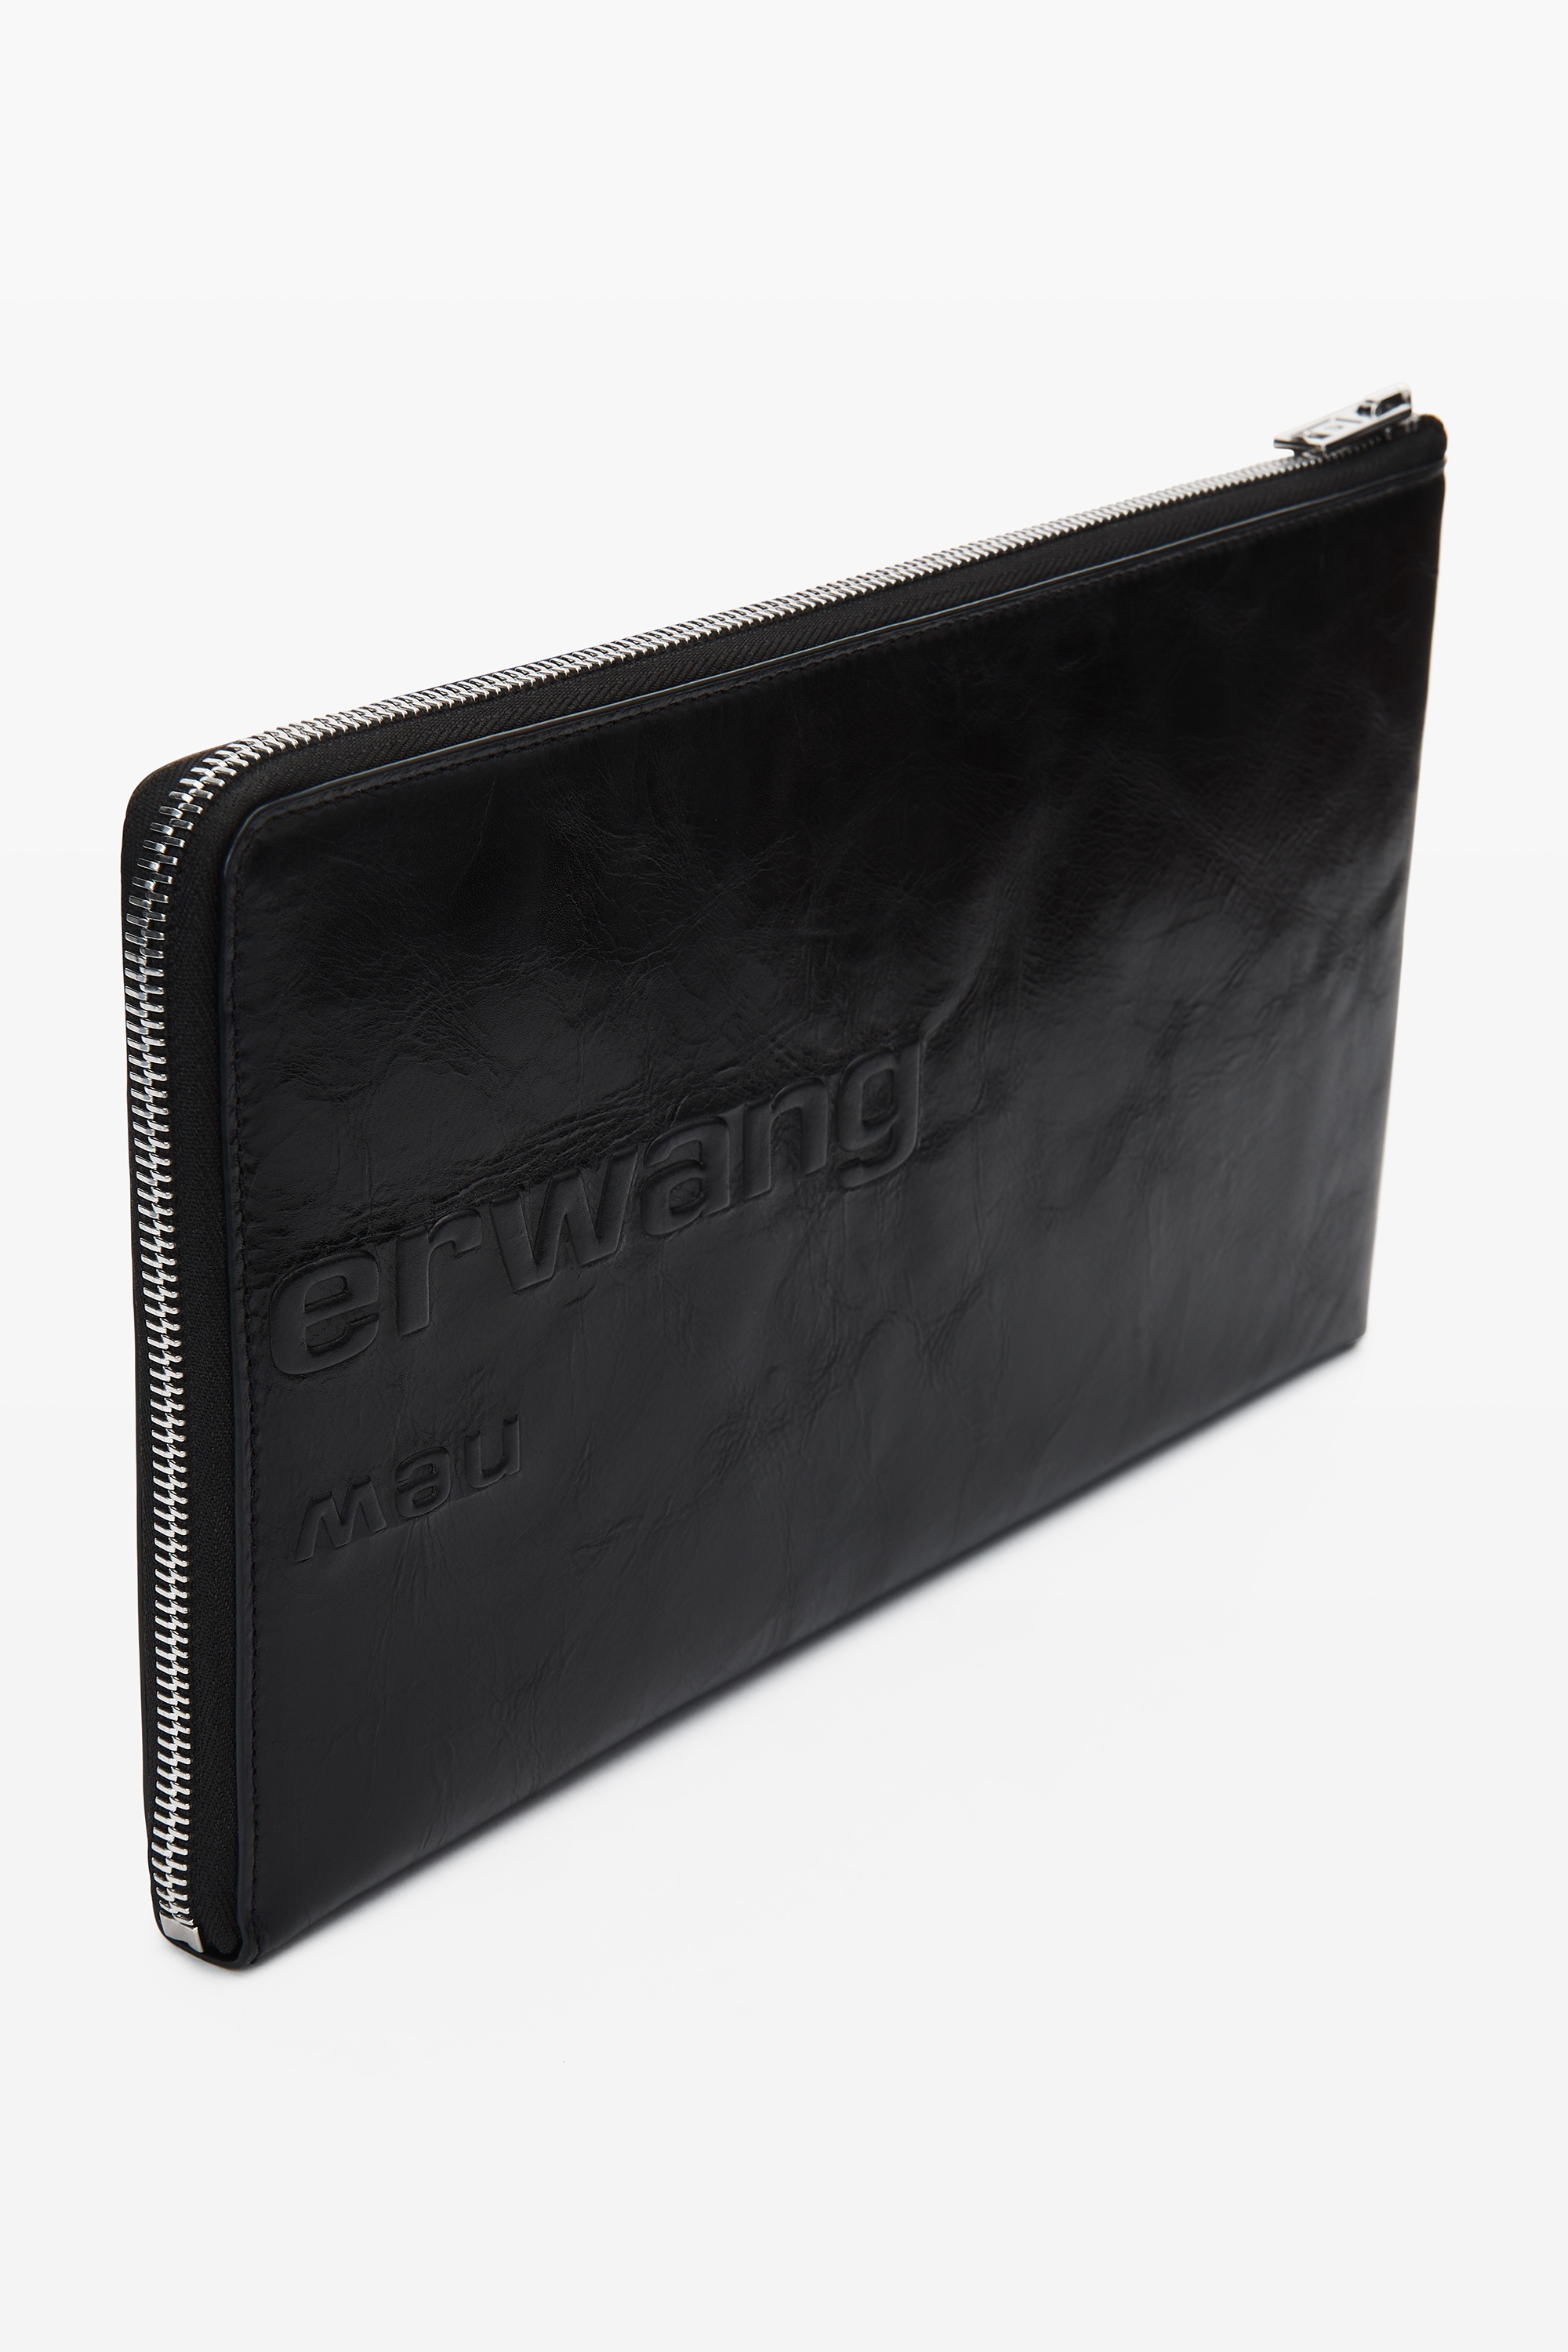 punch zip pouch in crackle patent leather - 6